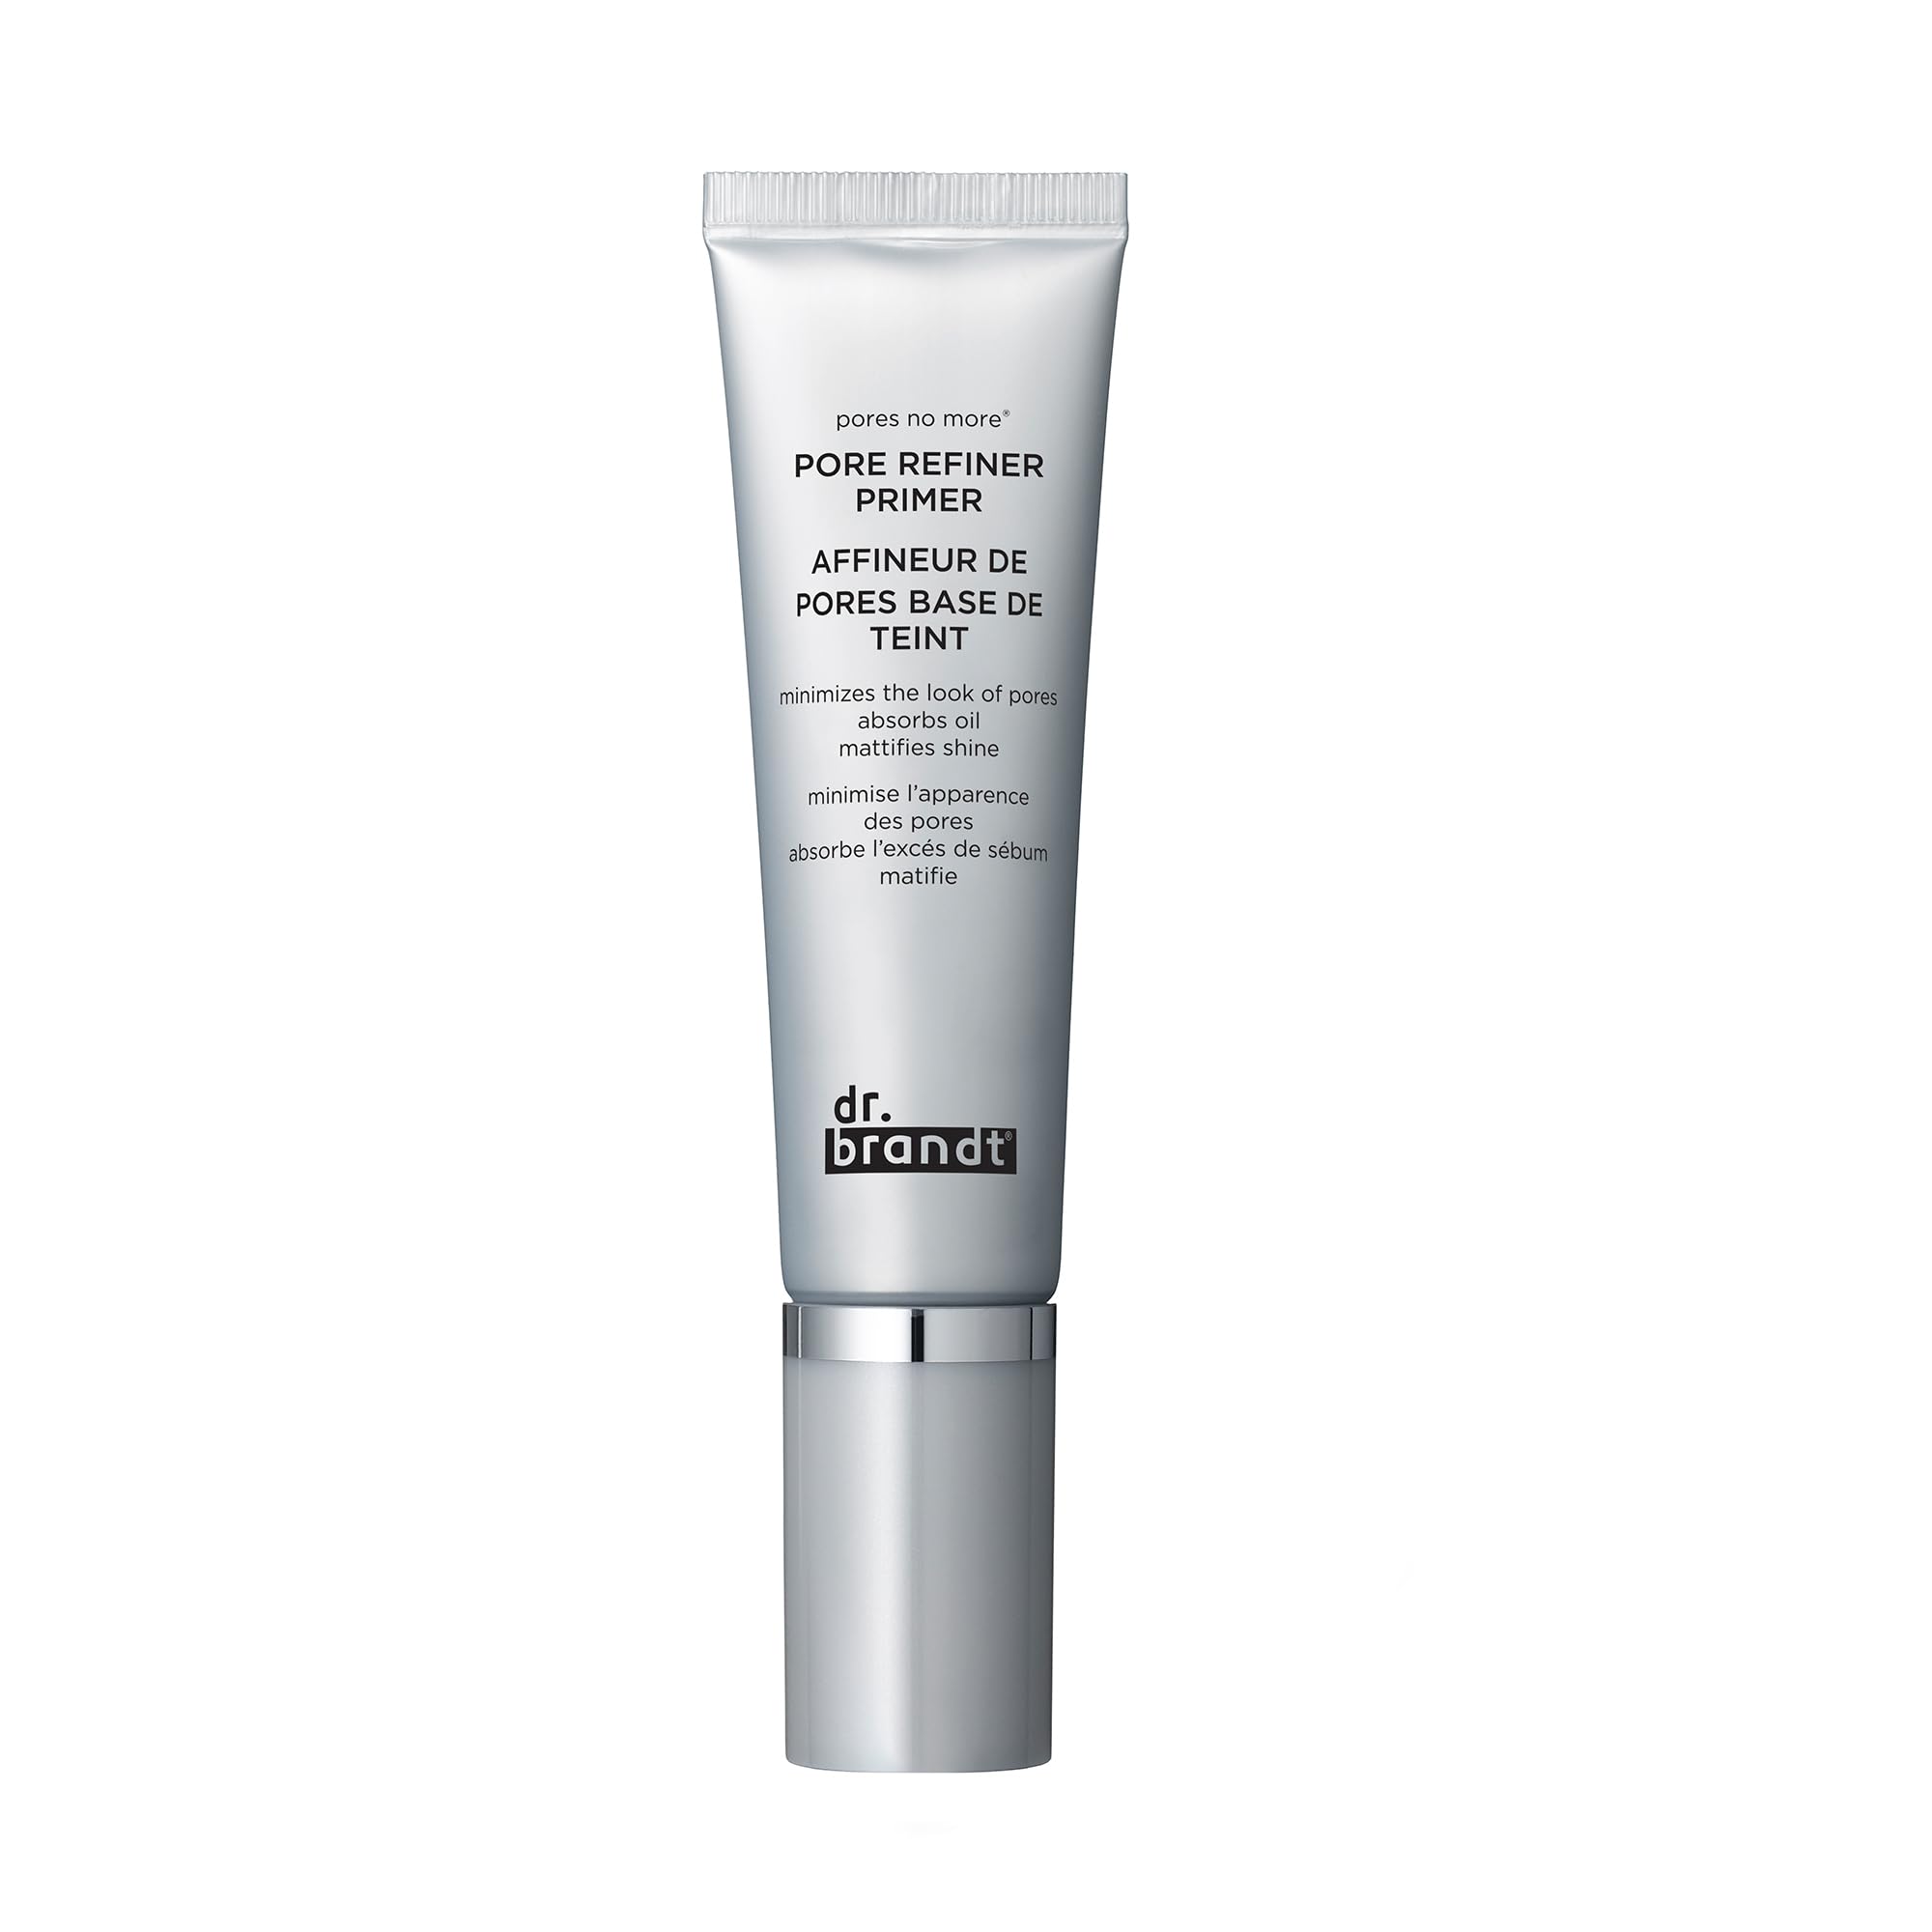 Dr. Brandt Pores No More Pore Refiner Primer - Instantly Minimizes The Appearance of Pores, Diffuses Fine Lines and Imperfections - 1 fl oz / 30 ml